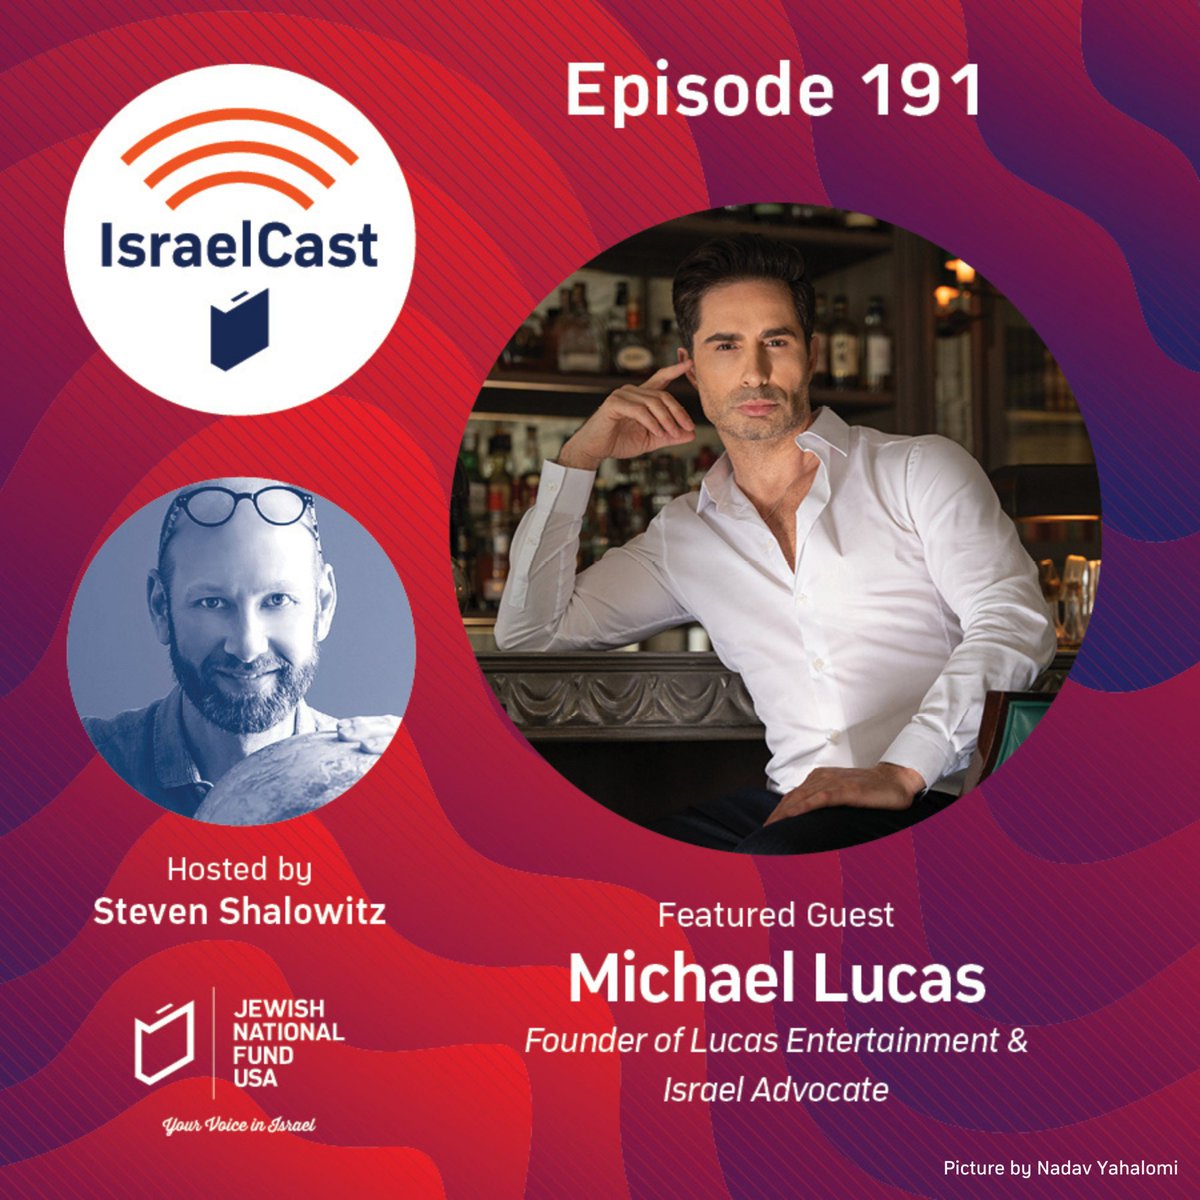 Tune into the latest episode of IsraelCast to hear Michael Lucas discuss how he got into the entertainment business, the antisemitism he faced while trying to screen his documentary, and his support for Israel in the face of potential boycotts.

--> jnf.org/israelcast